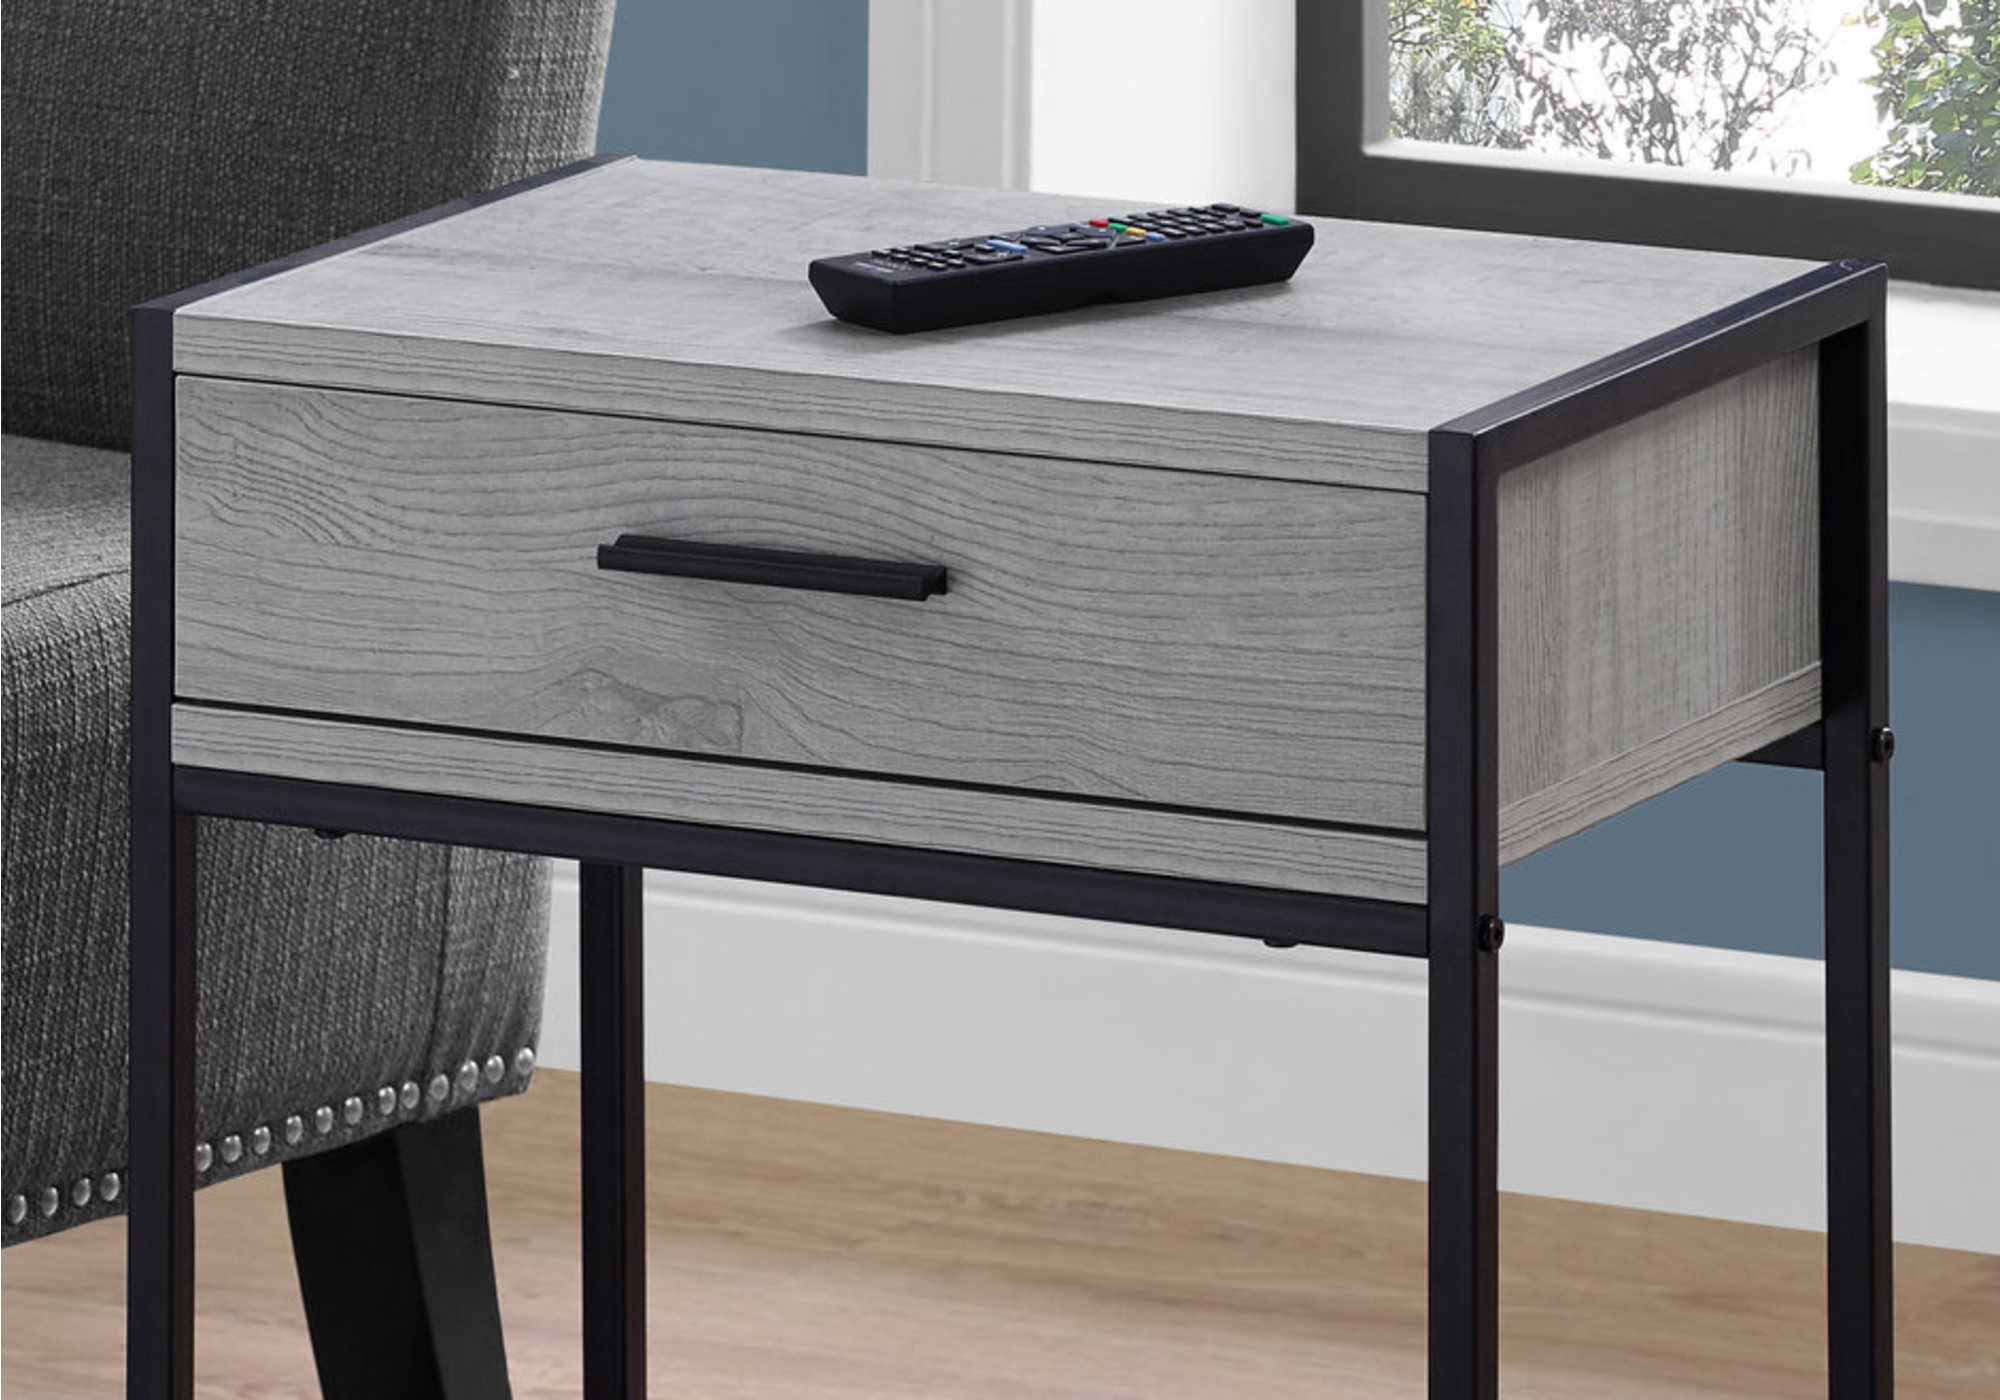 ACCENT TABLE - 22"H / GREY / BLACK METAL / TEMPERED GLASS